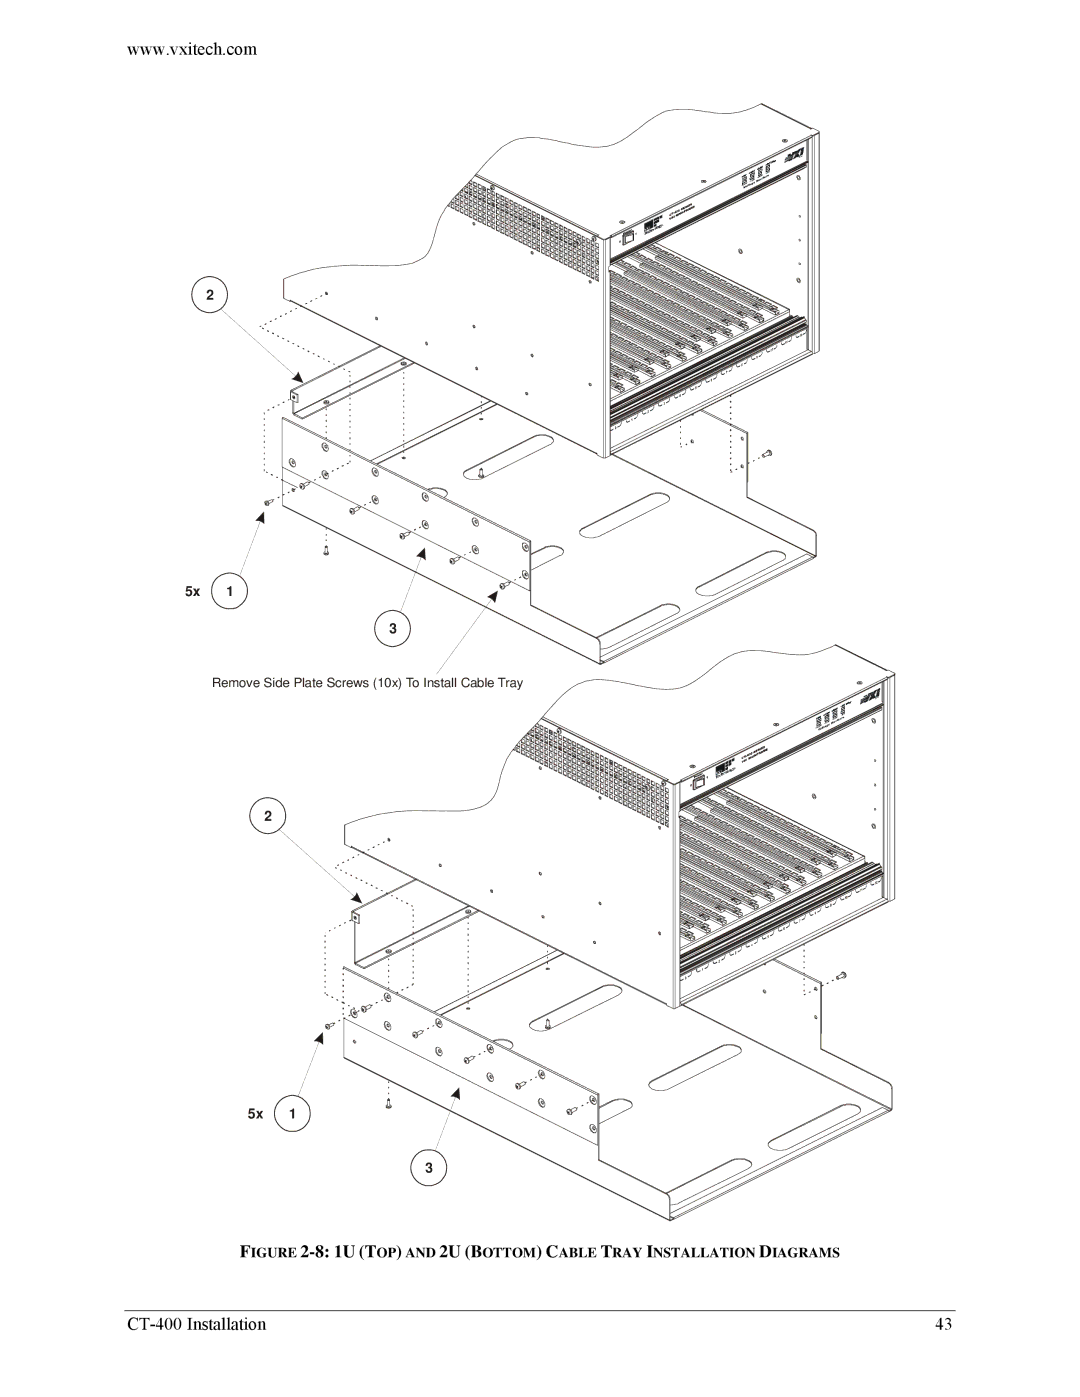 VXI CT-400 user manual 1U TOP and 2U Bottom Cable Tray Installation Diagrams 